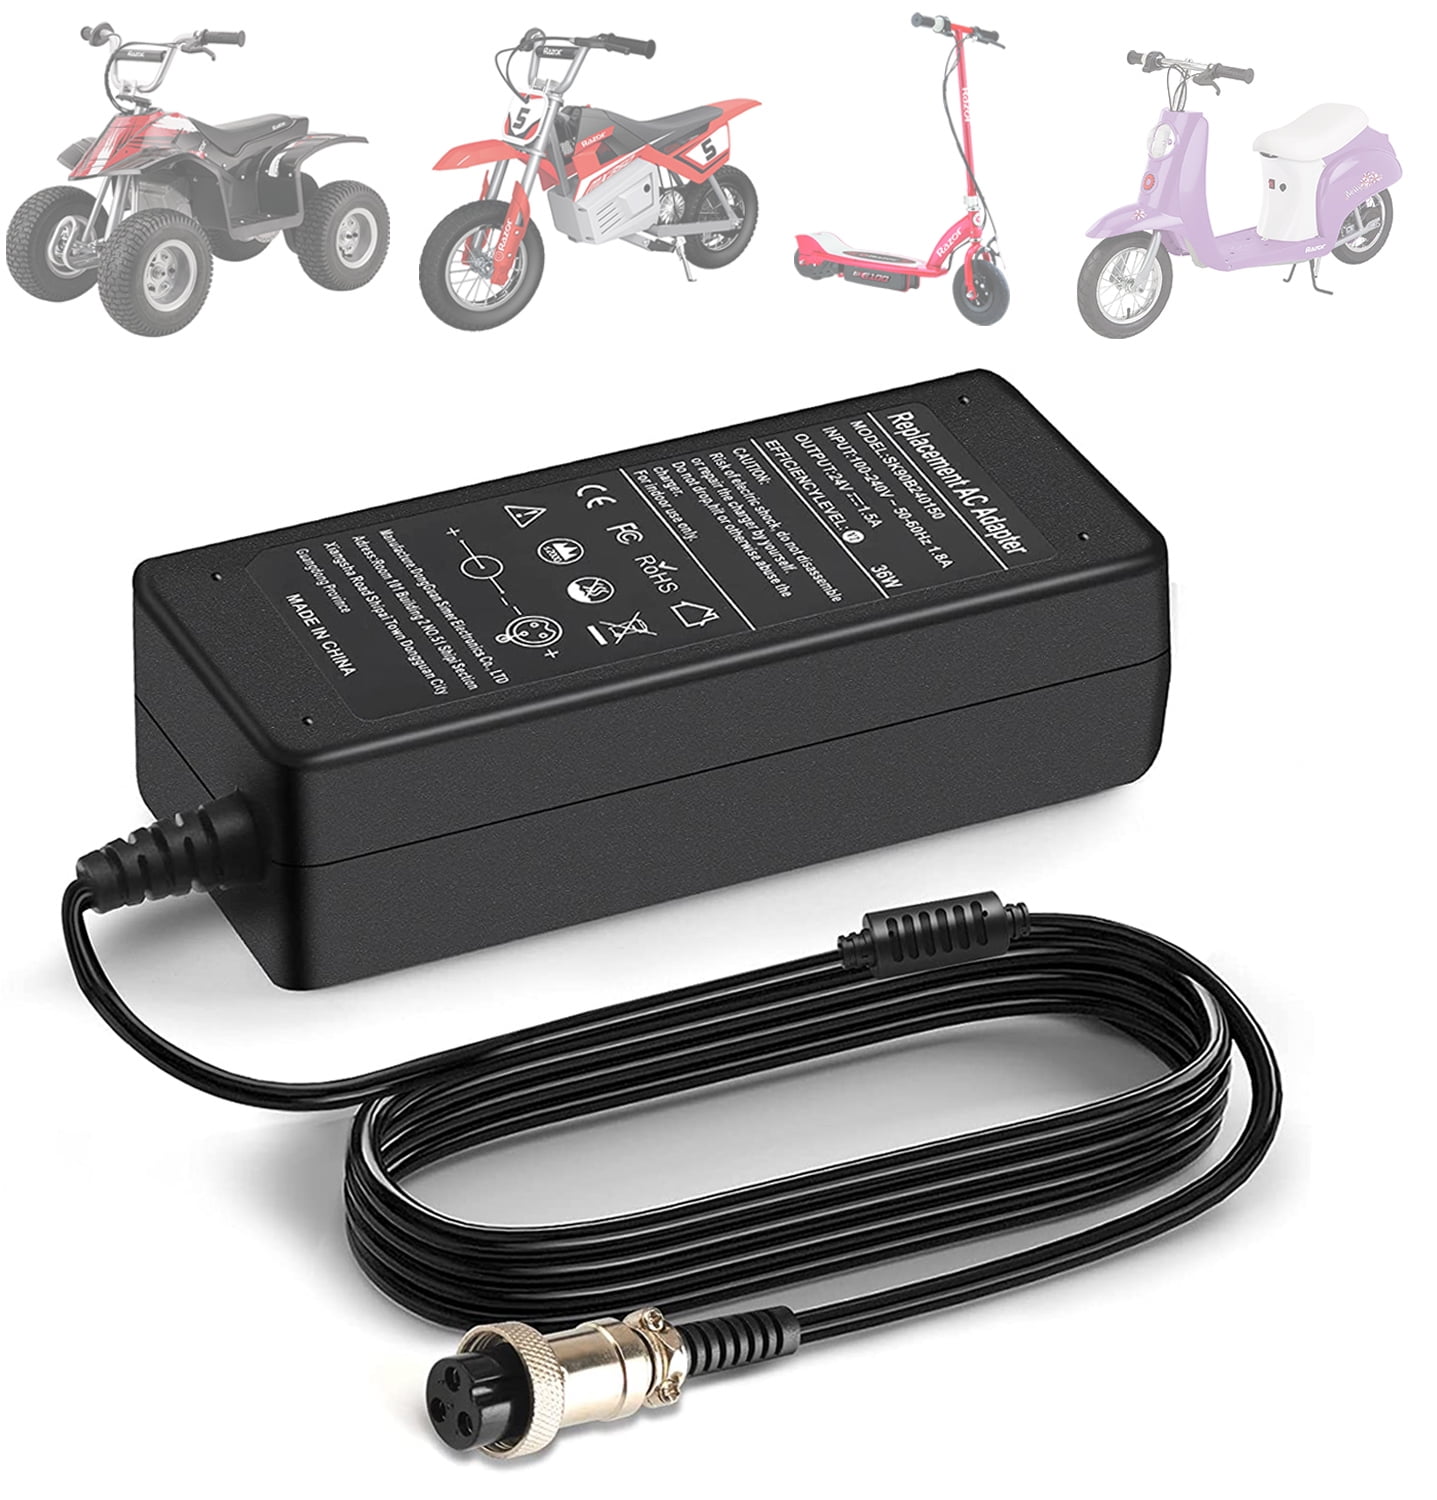 NEW 24 Volt 2A Battery Charger For Razor Electric Scooter 24V 